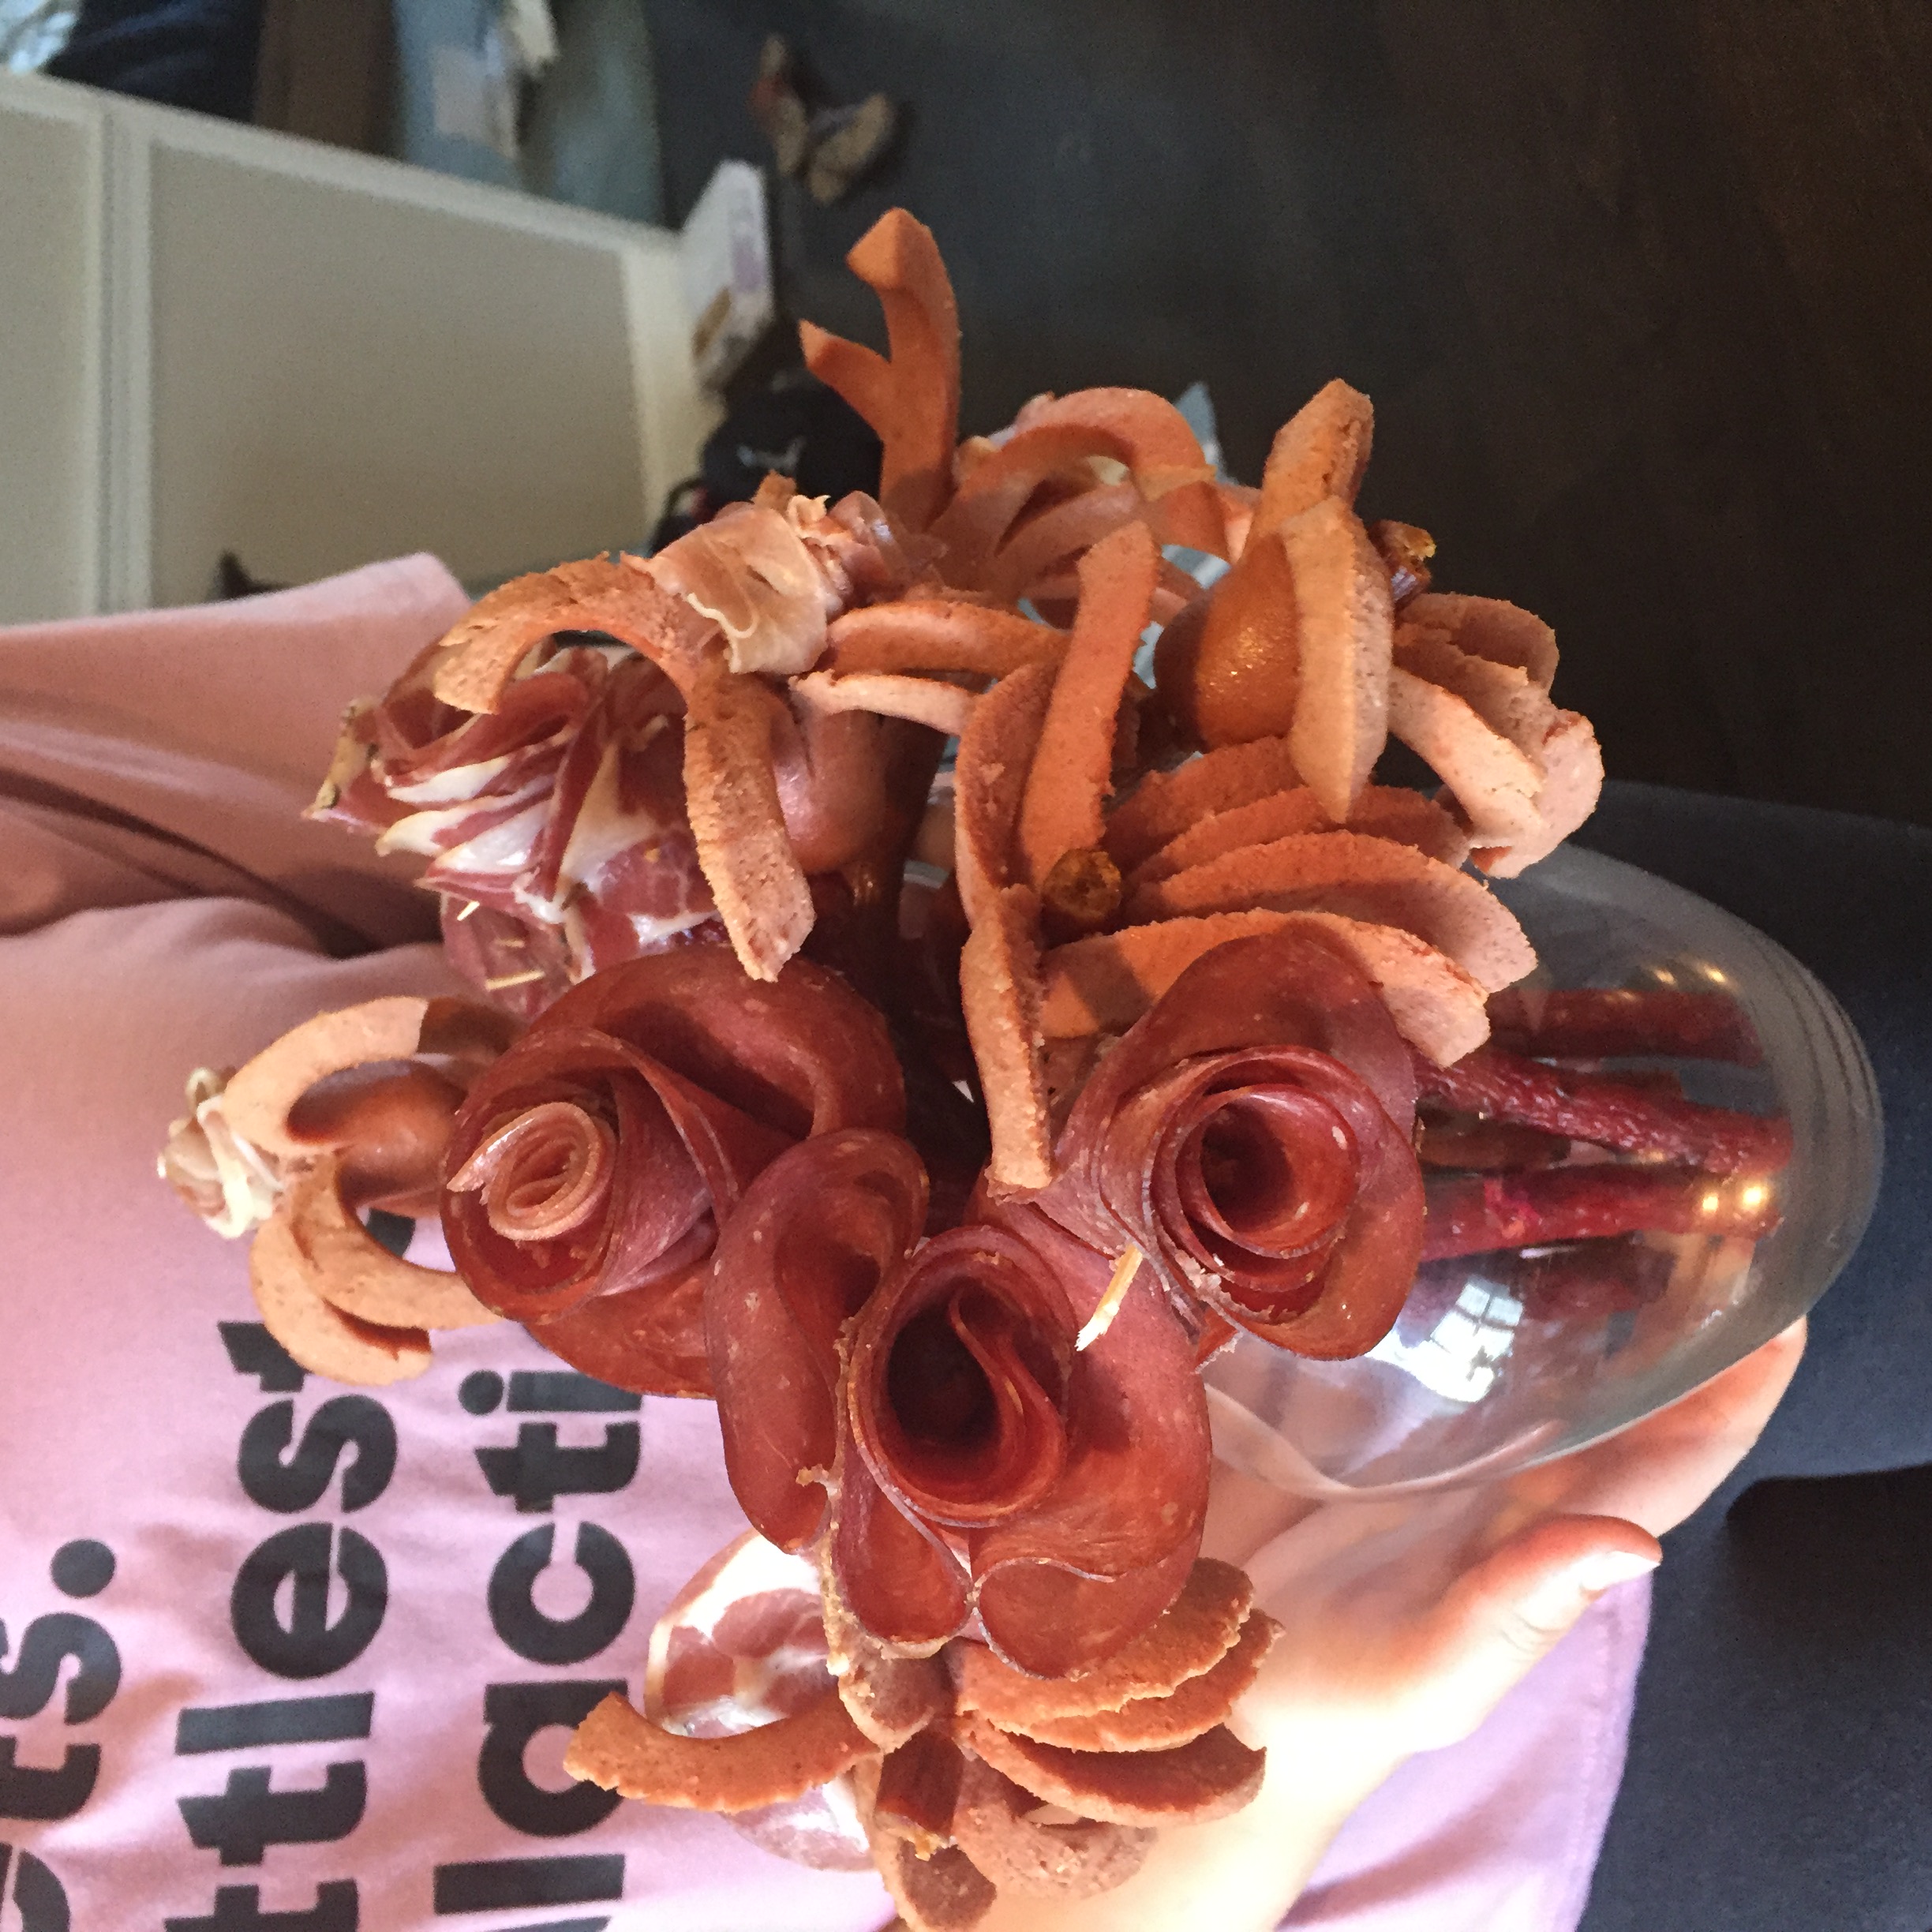 DF7ED4F6 DC82 43D0 B01F 9EB0C569DB94 Meat bouquet of flowers - Father’s Day DIY